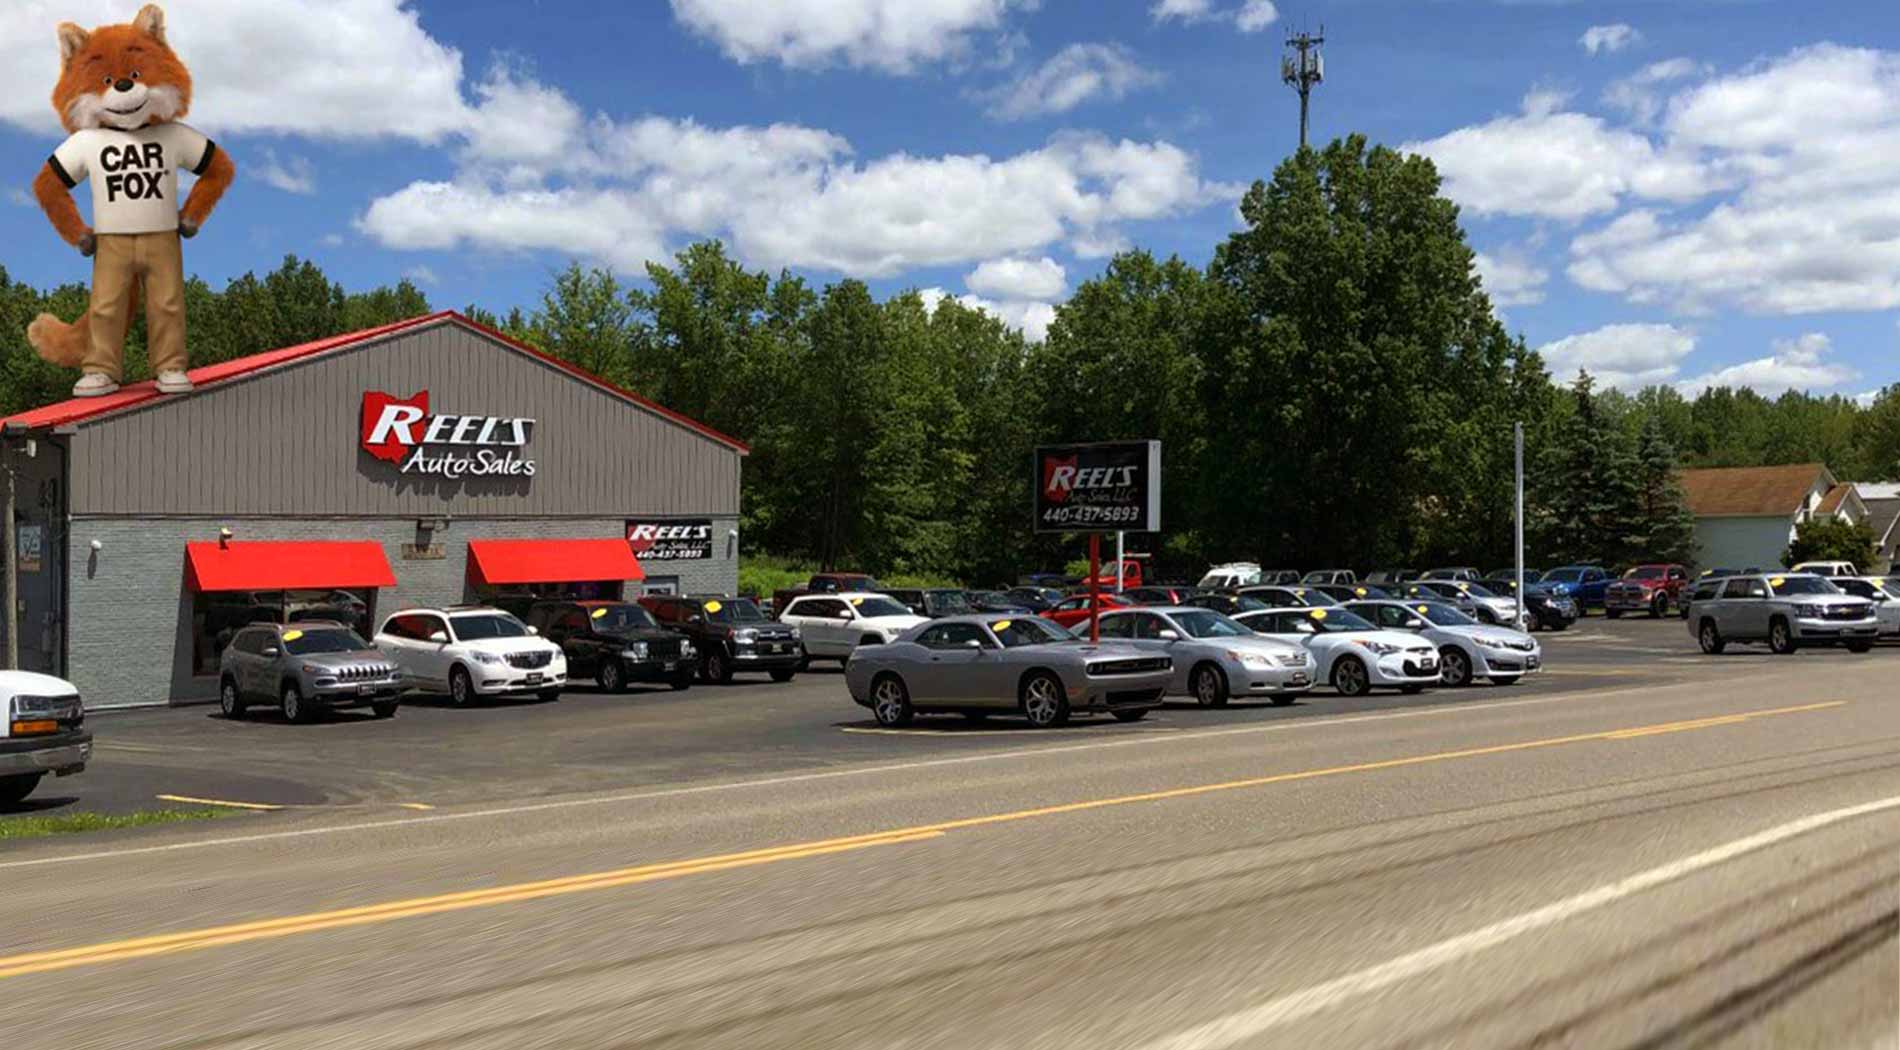 Used Cars Orwell OH,Pre-Owned Autos Warren OH,44076,BHPH  Cleveland,Previously Owned BHPH Vehicles Ashtabula County OH,In House  Financing Painesville OH,Affordable Cars,Best Car Deals Painesville,Used  Trucks Orwell,Used SUV's,Vans Cleveland,Boats,Used